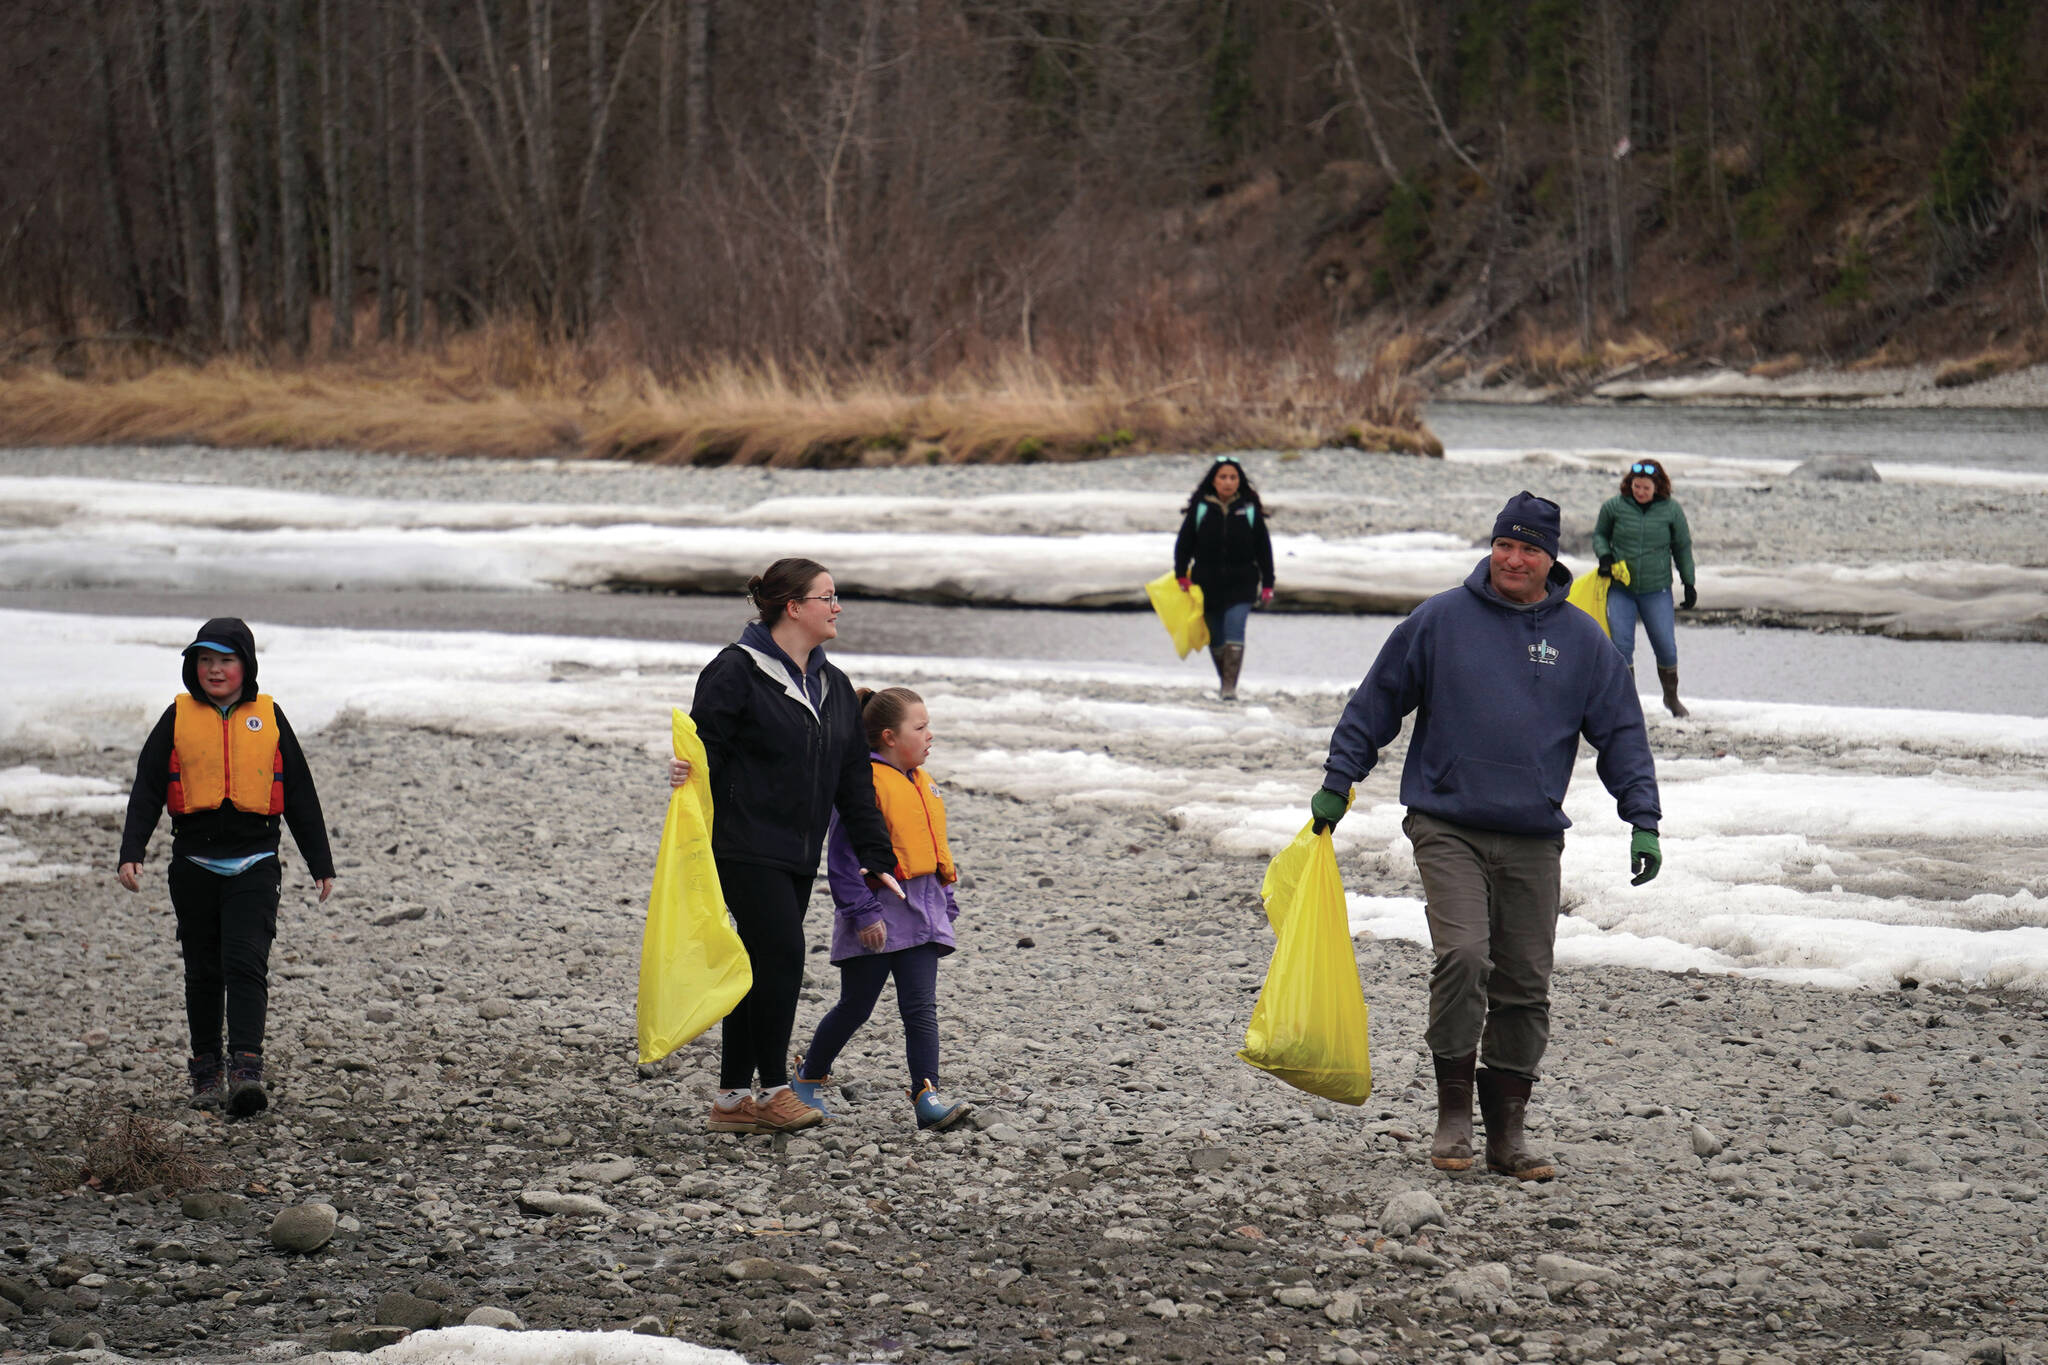 Jake Dye/Peninsula Clarion
Students of Soldotna Montessori Charter School comb for trash along the banks of the Kenai River at Centennial Park in Soldotna on Thursday.